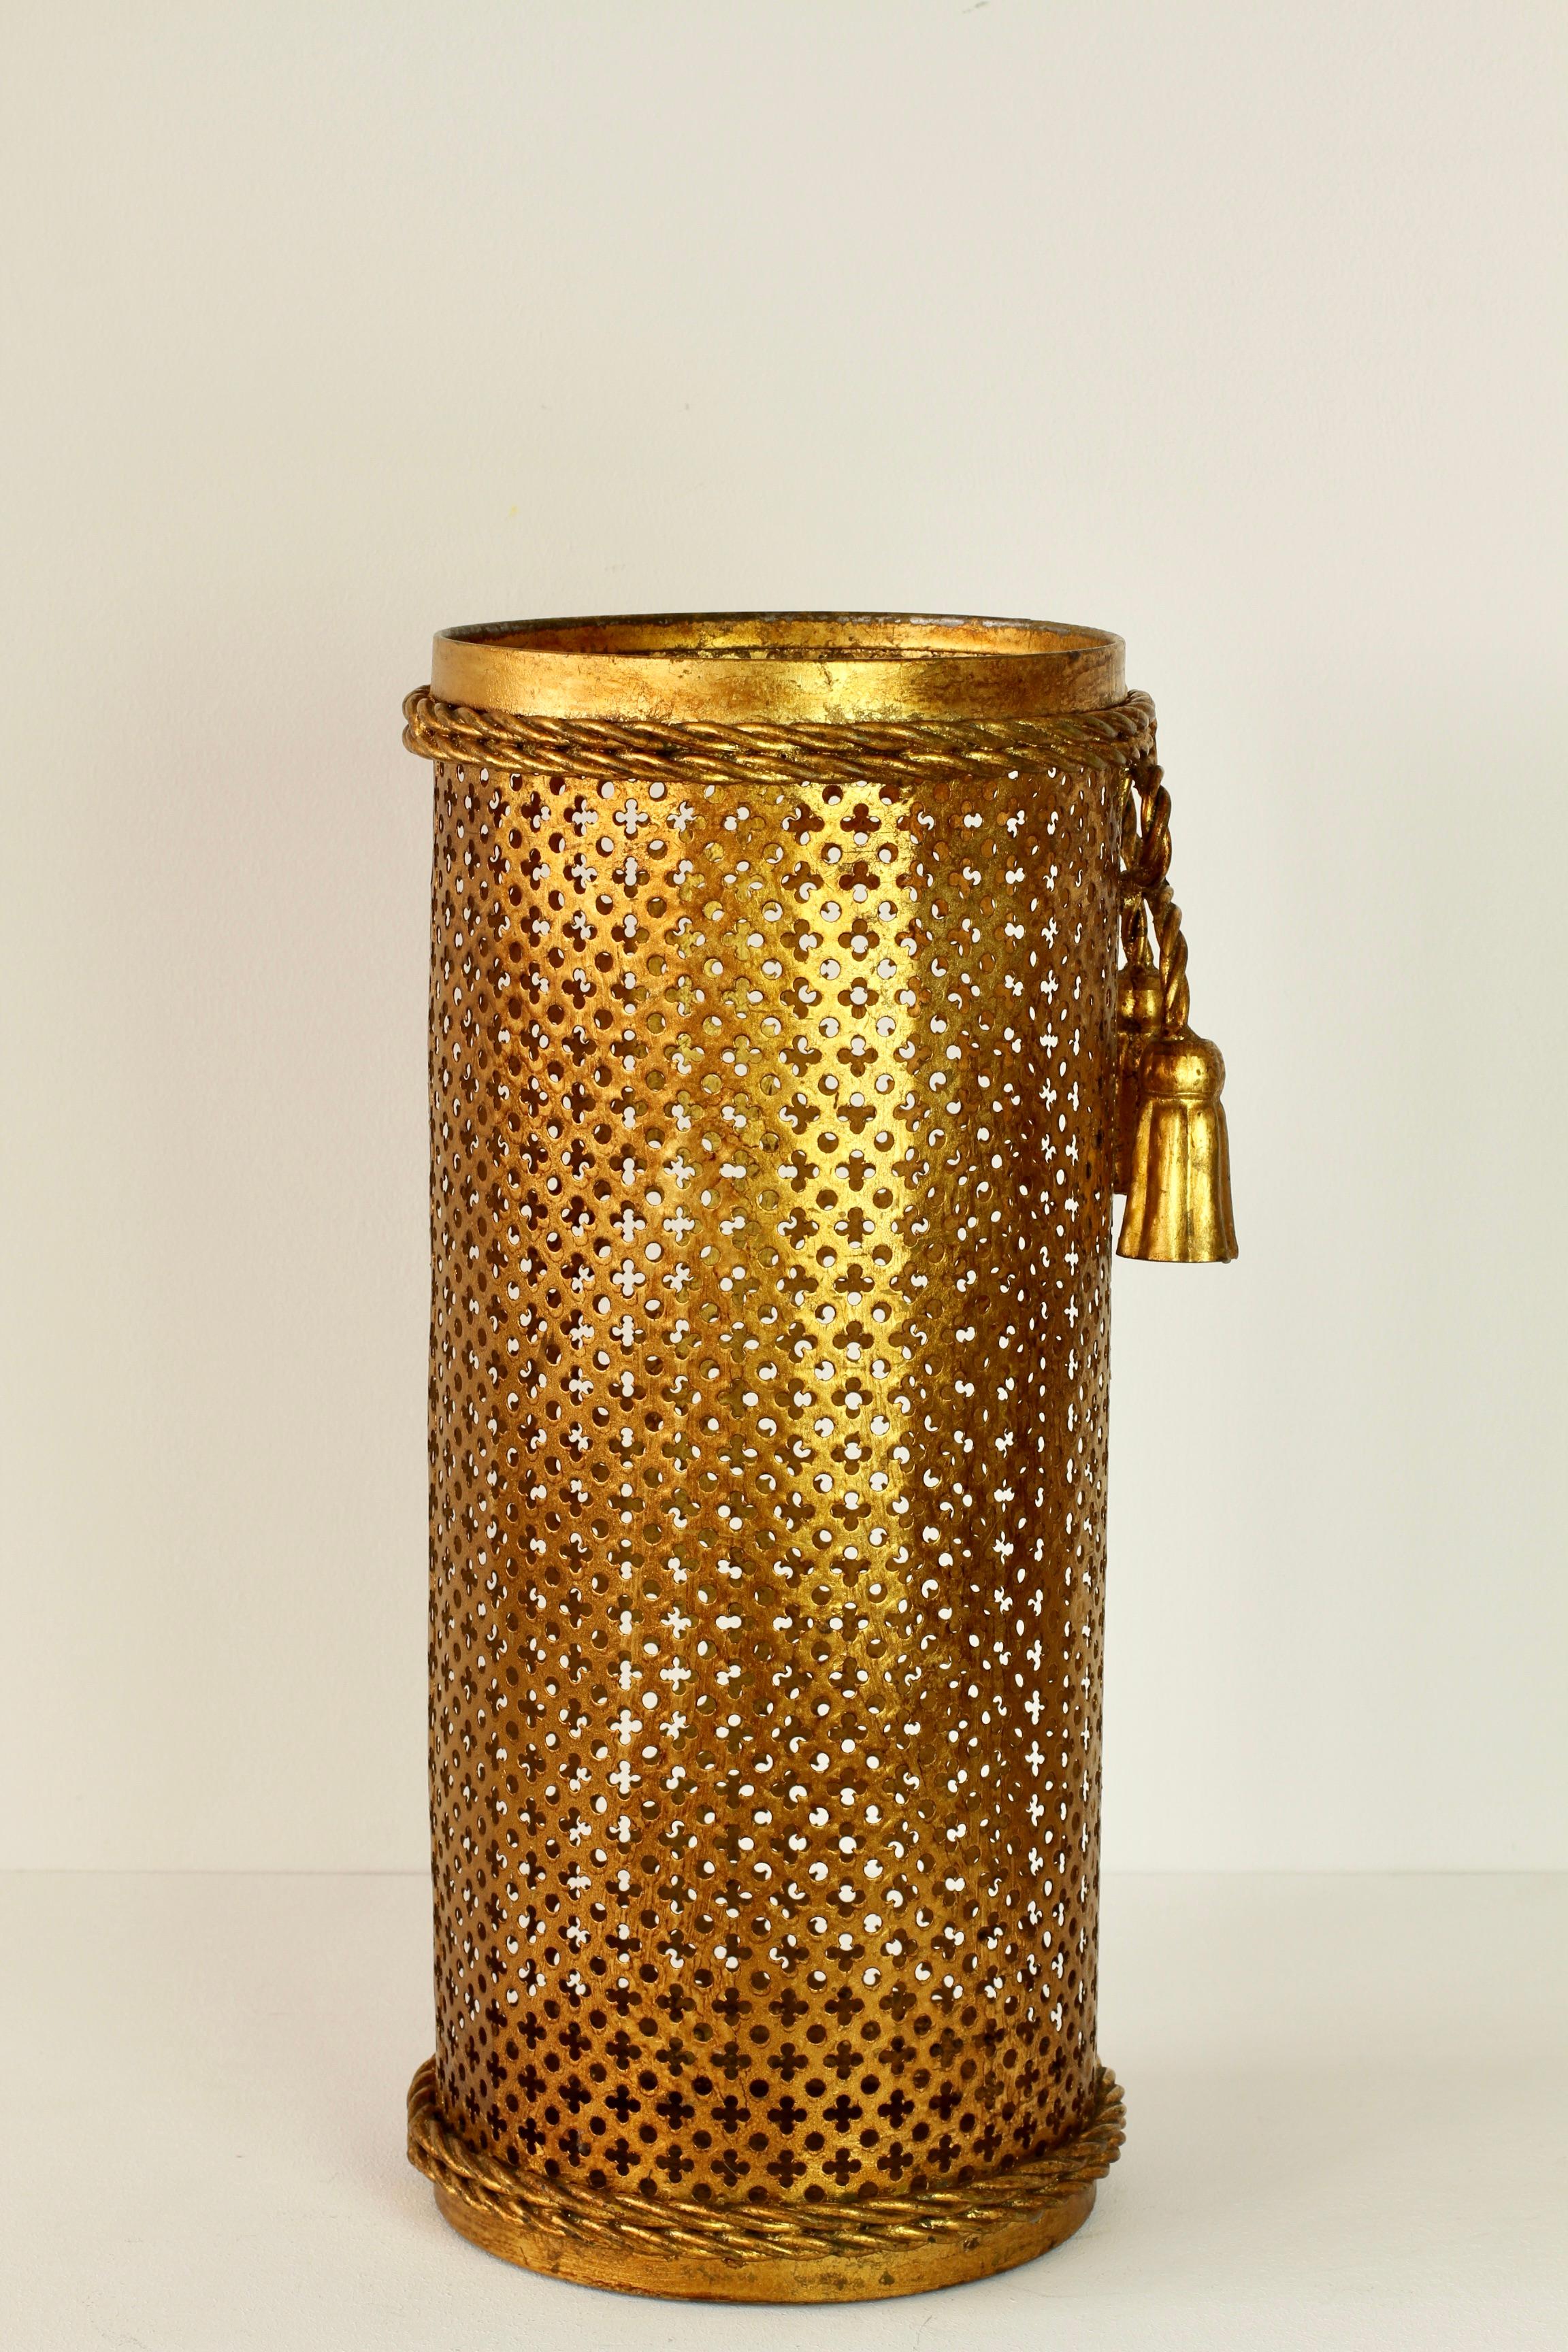 Metal Midcentury Italian Hollywood Regency Gold Gilded Umbrella Stand or Holder, 1950s For Sale